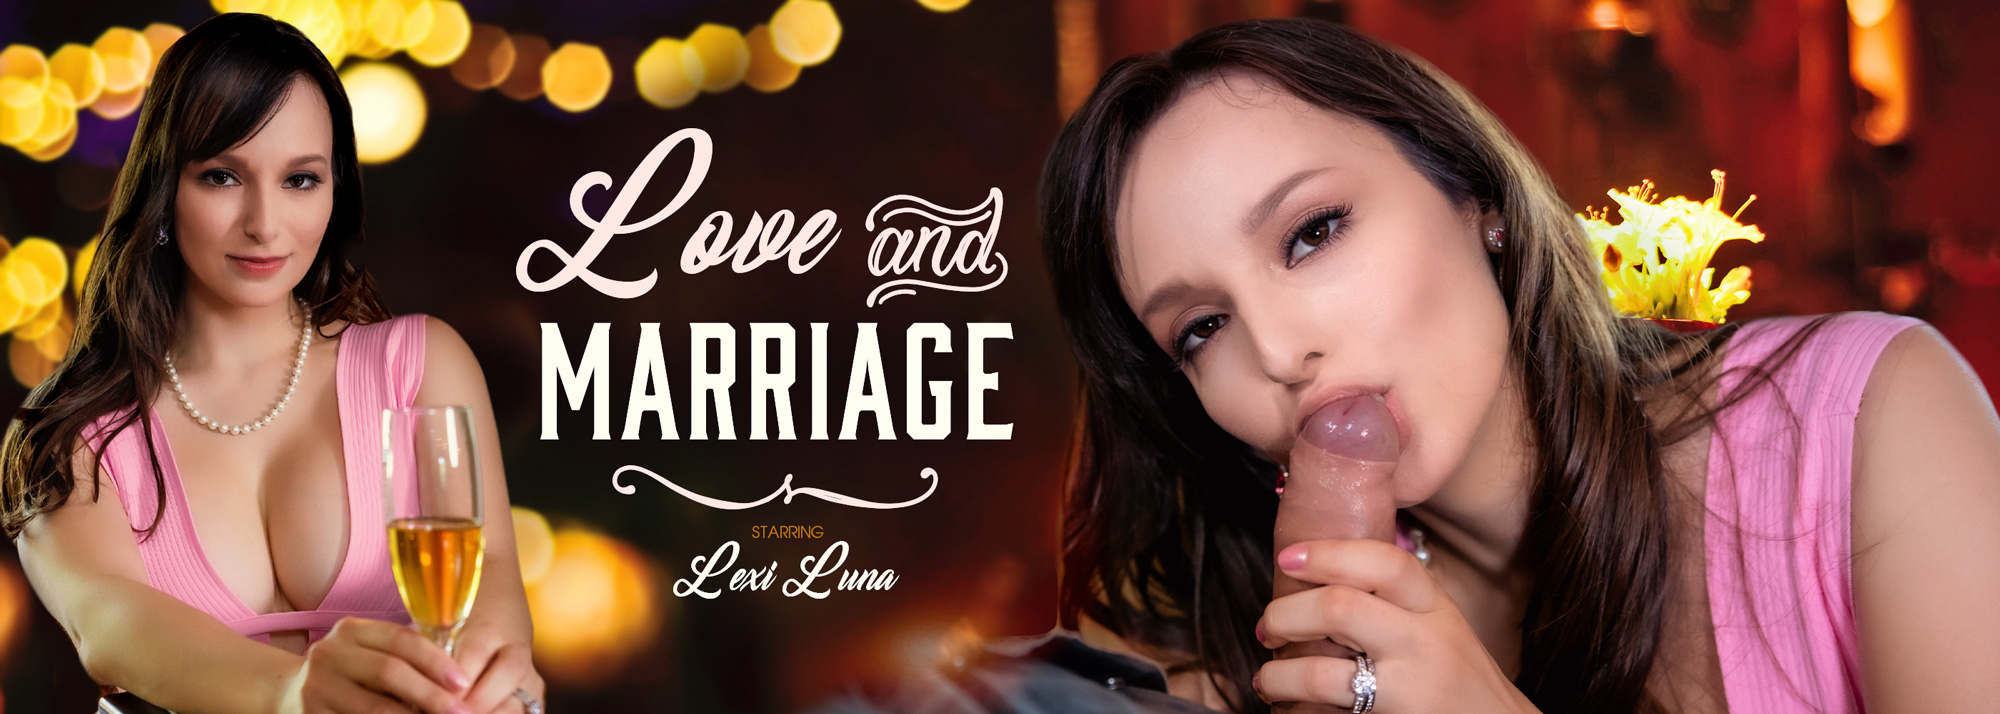 Marriagesexvideo - Love and Marriage VR Porn Video: 8K, 4K, Full HD and 180/360 POV | VR  Bangers